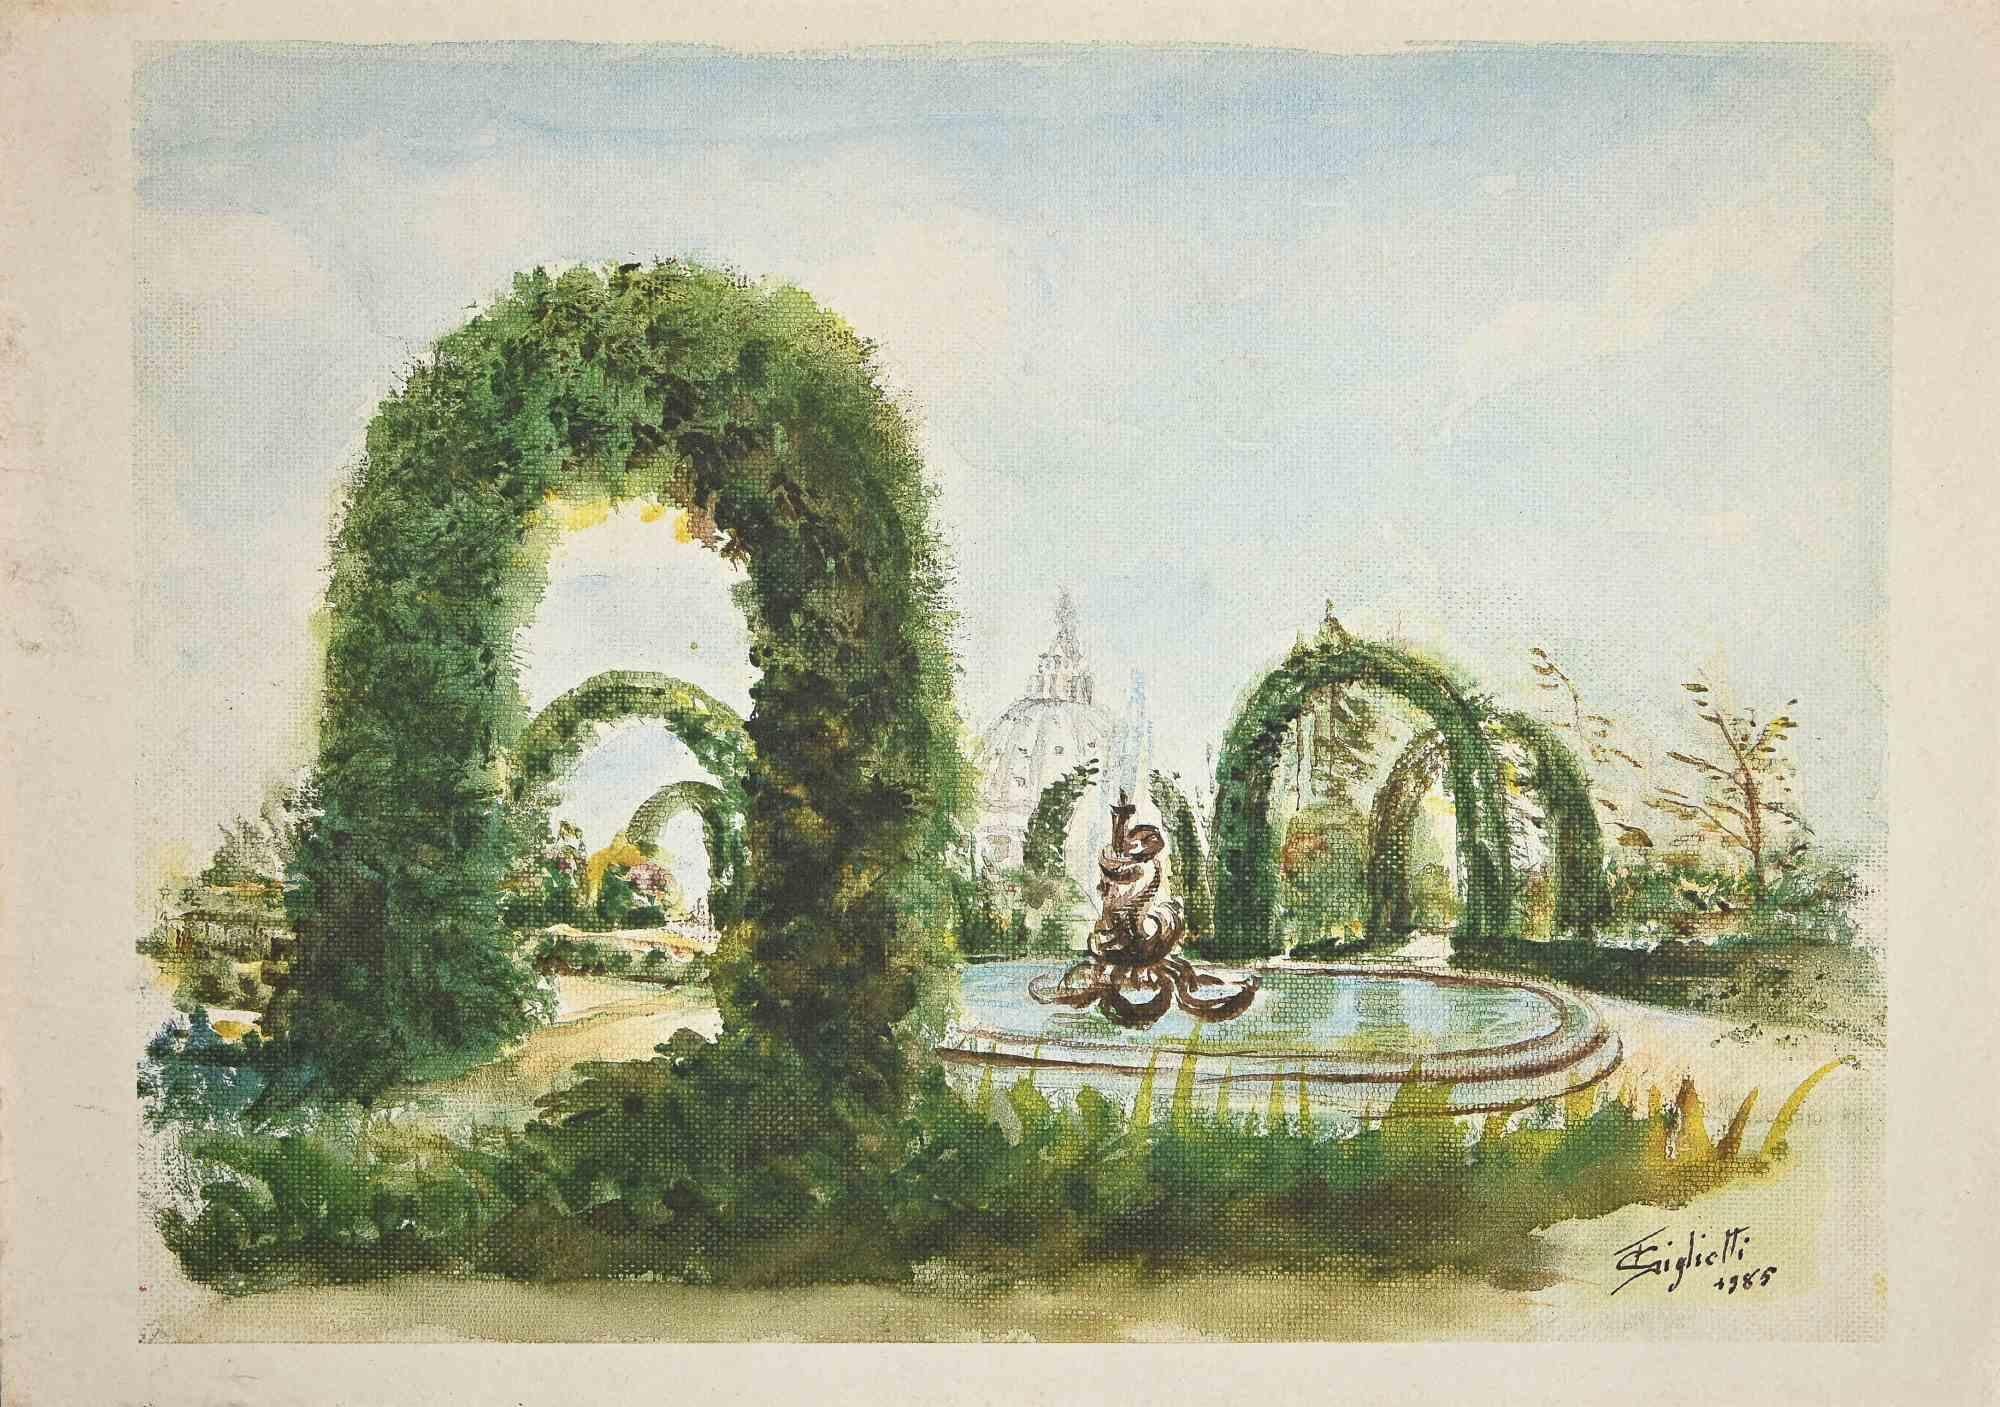 Garden in Rome is an original drawing in watercolor and Tempera realized by Zeno Giglietti in 1985.

Good conditions.

The artwork is depicted through harmonious colors in a well-balanced composition.